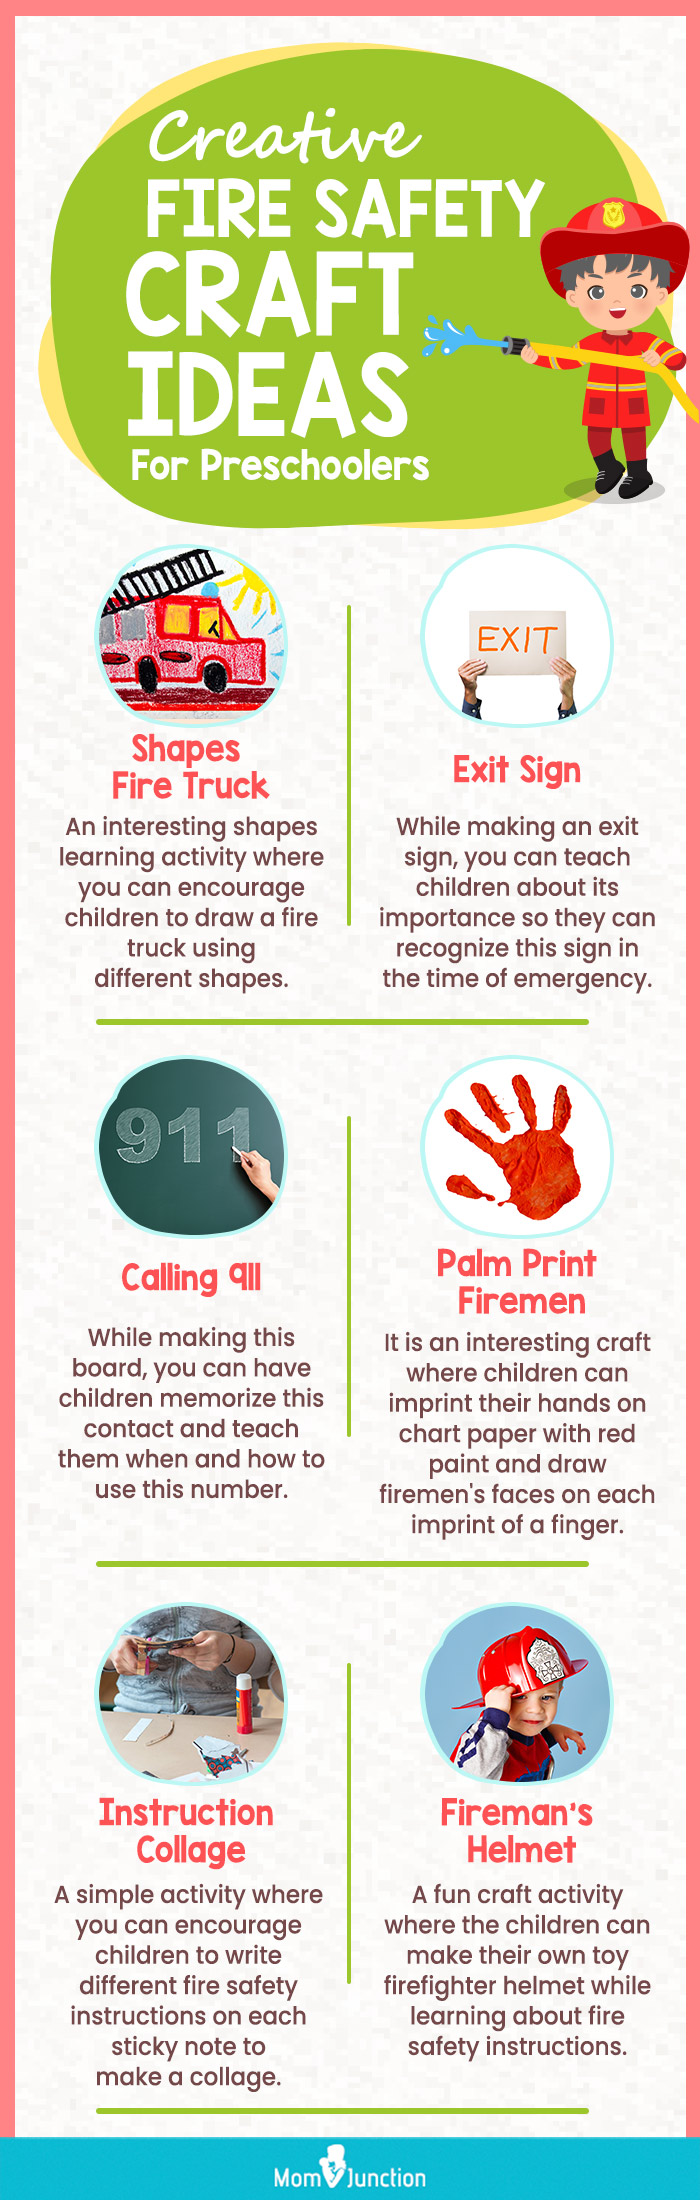 creative fire safety craft ideas for preschoolers (infographic)